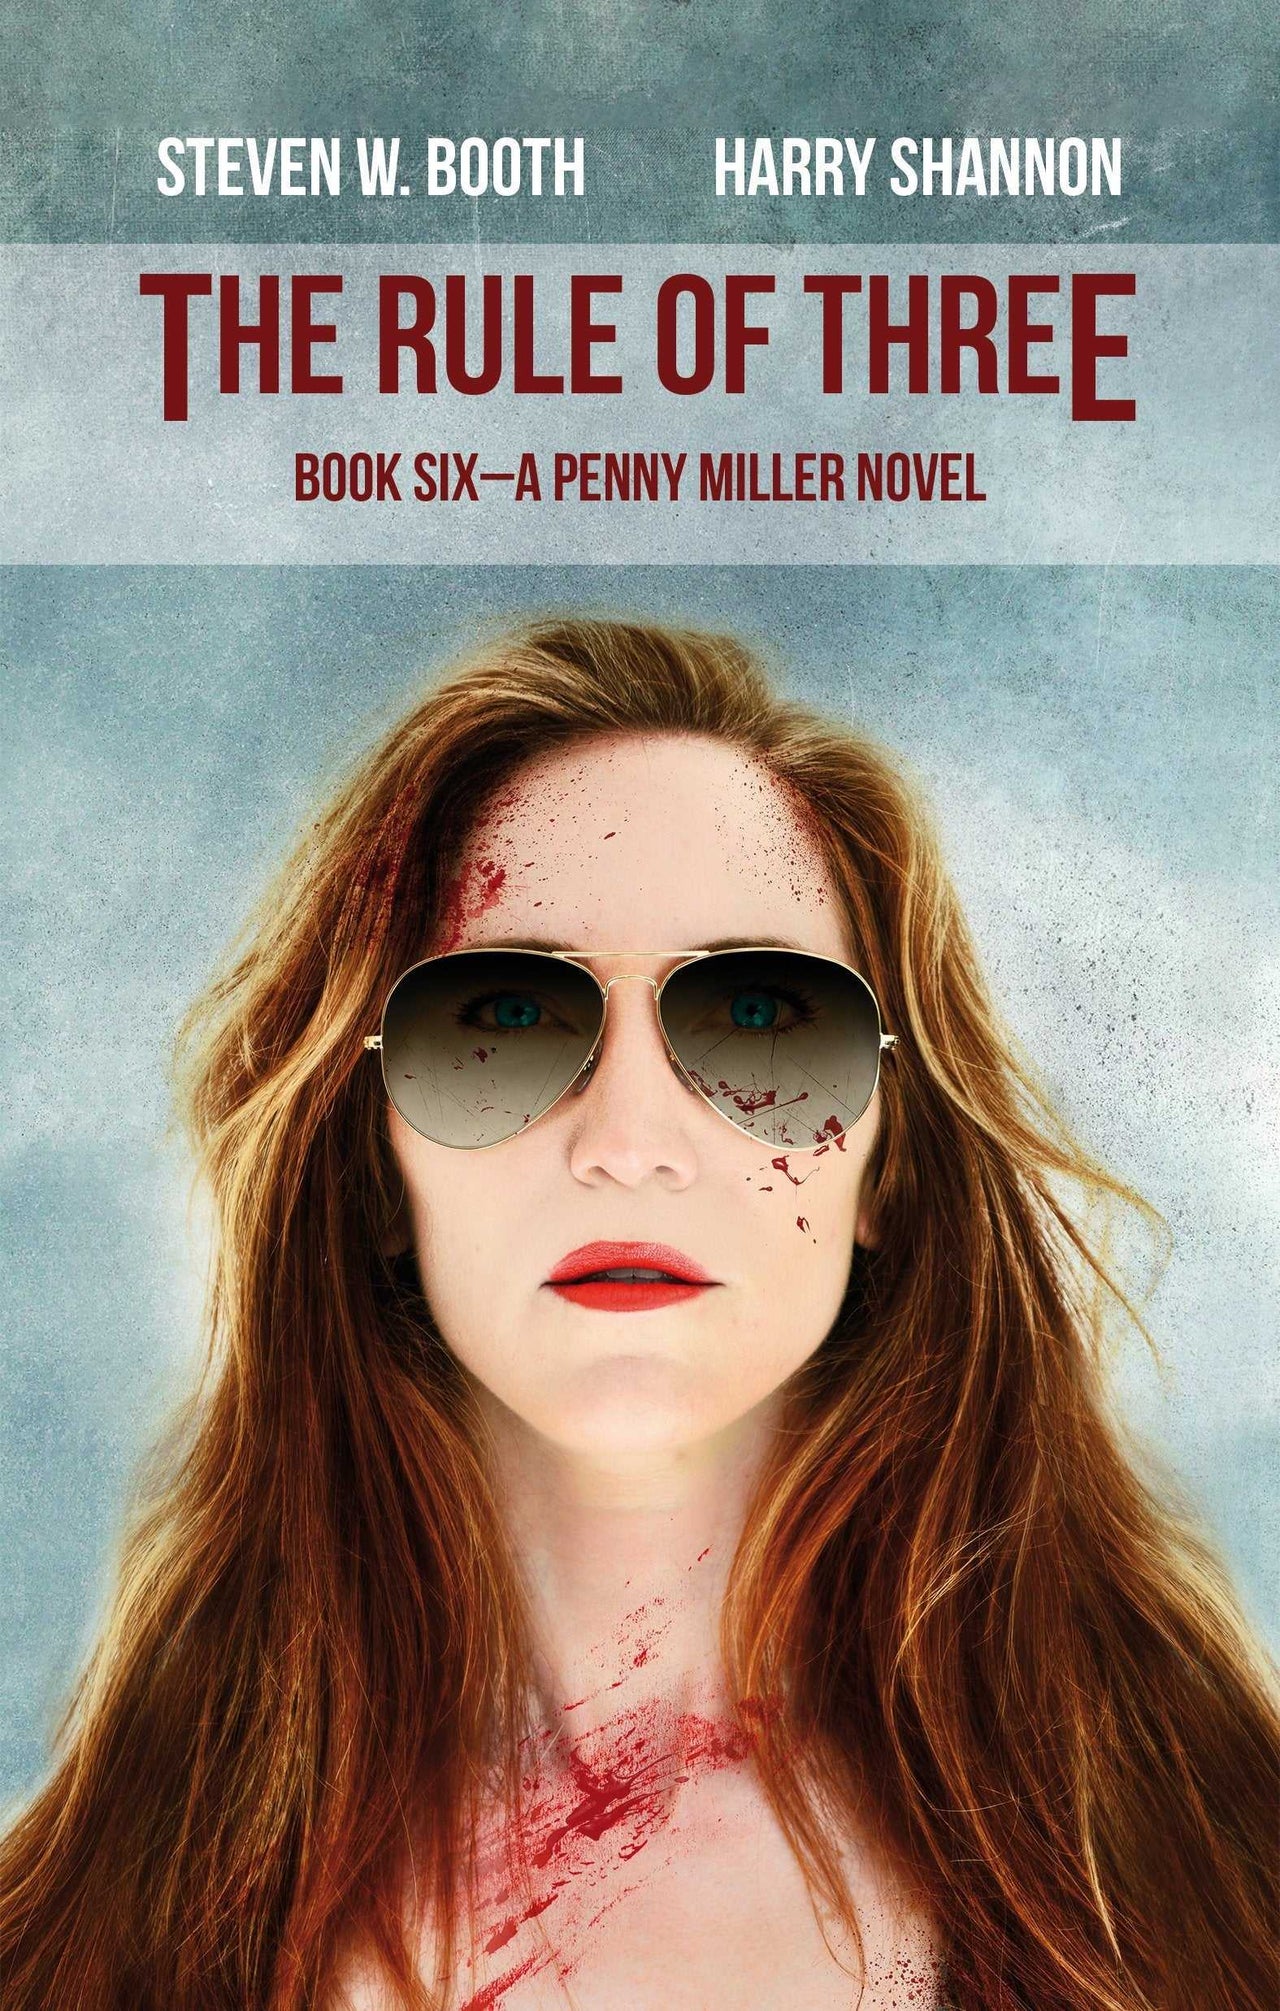 The Rule of Three - Penny Miller Book Six